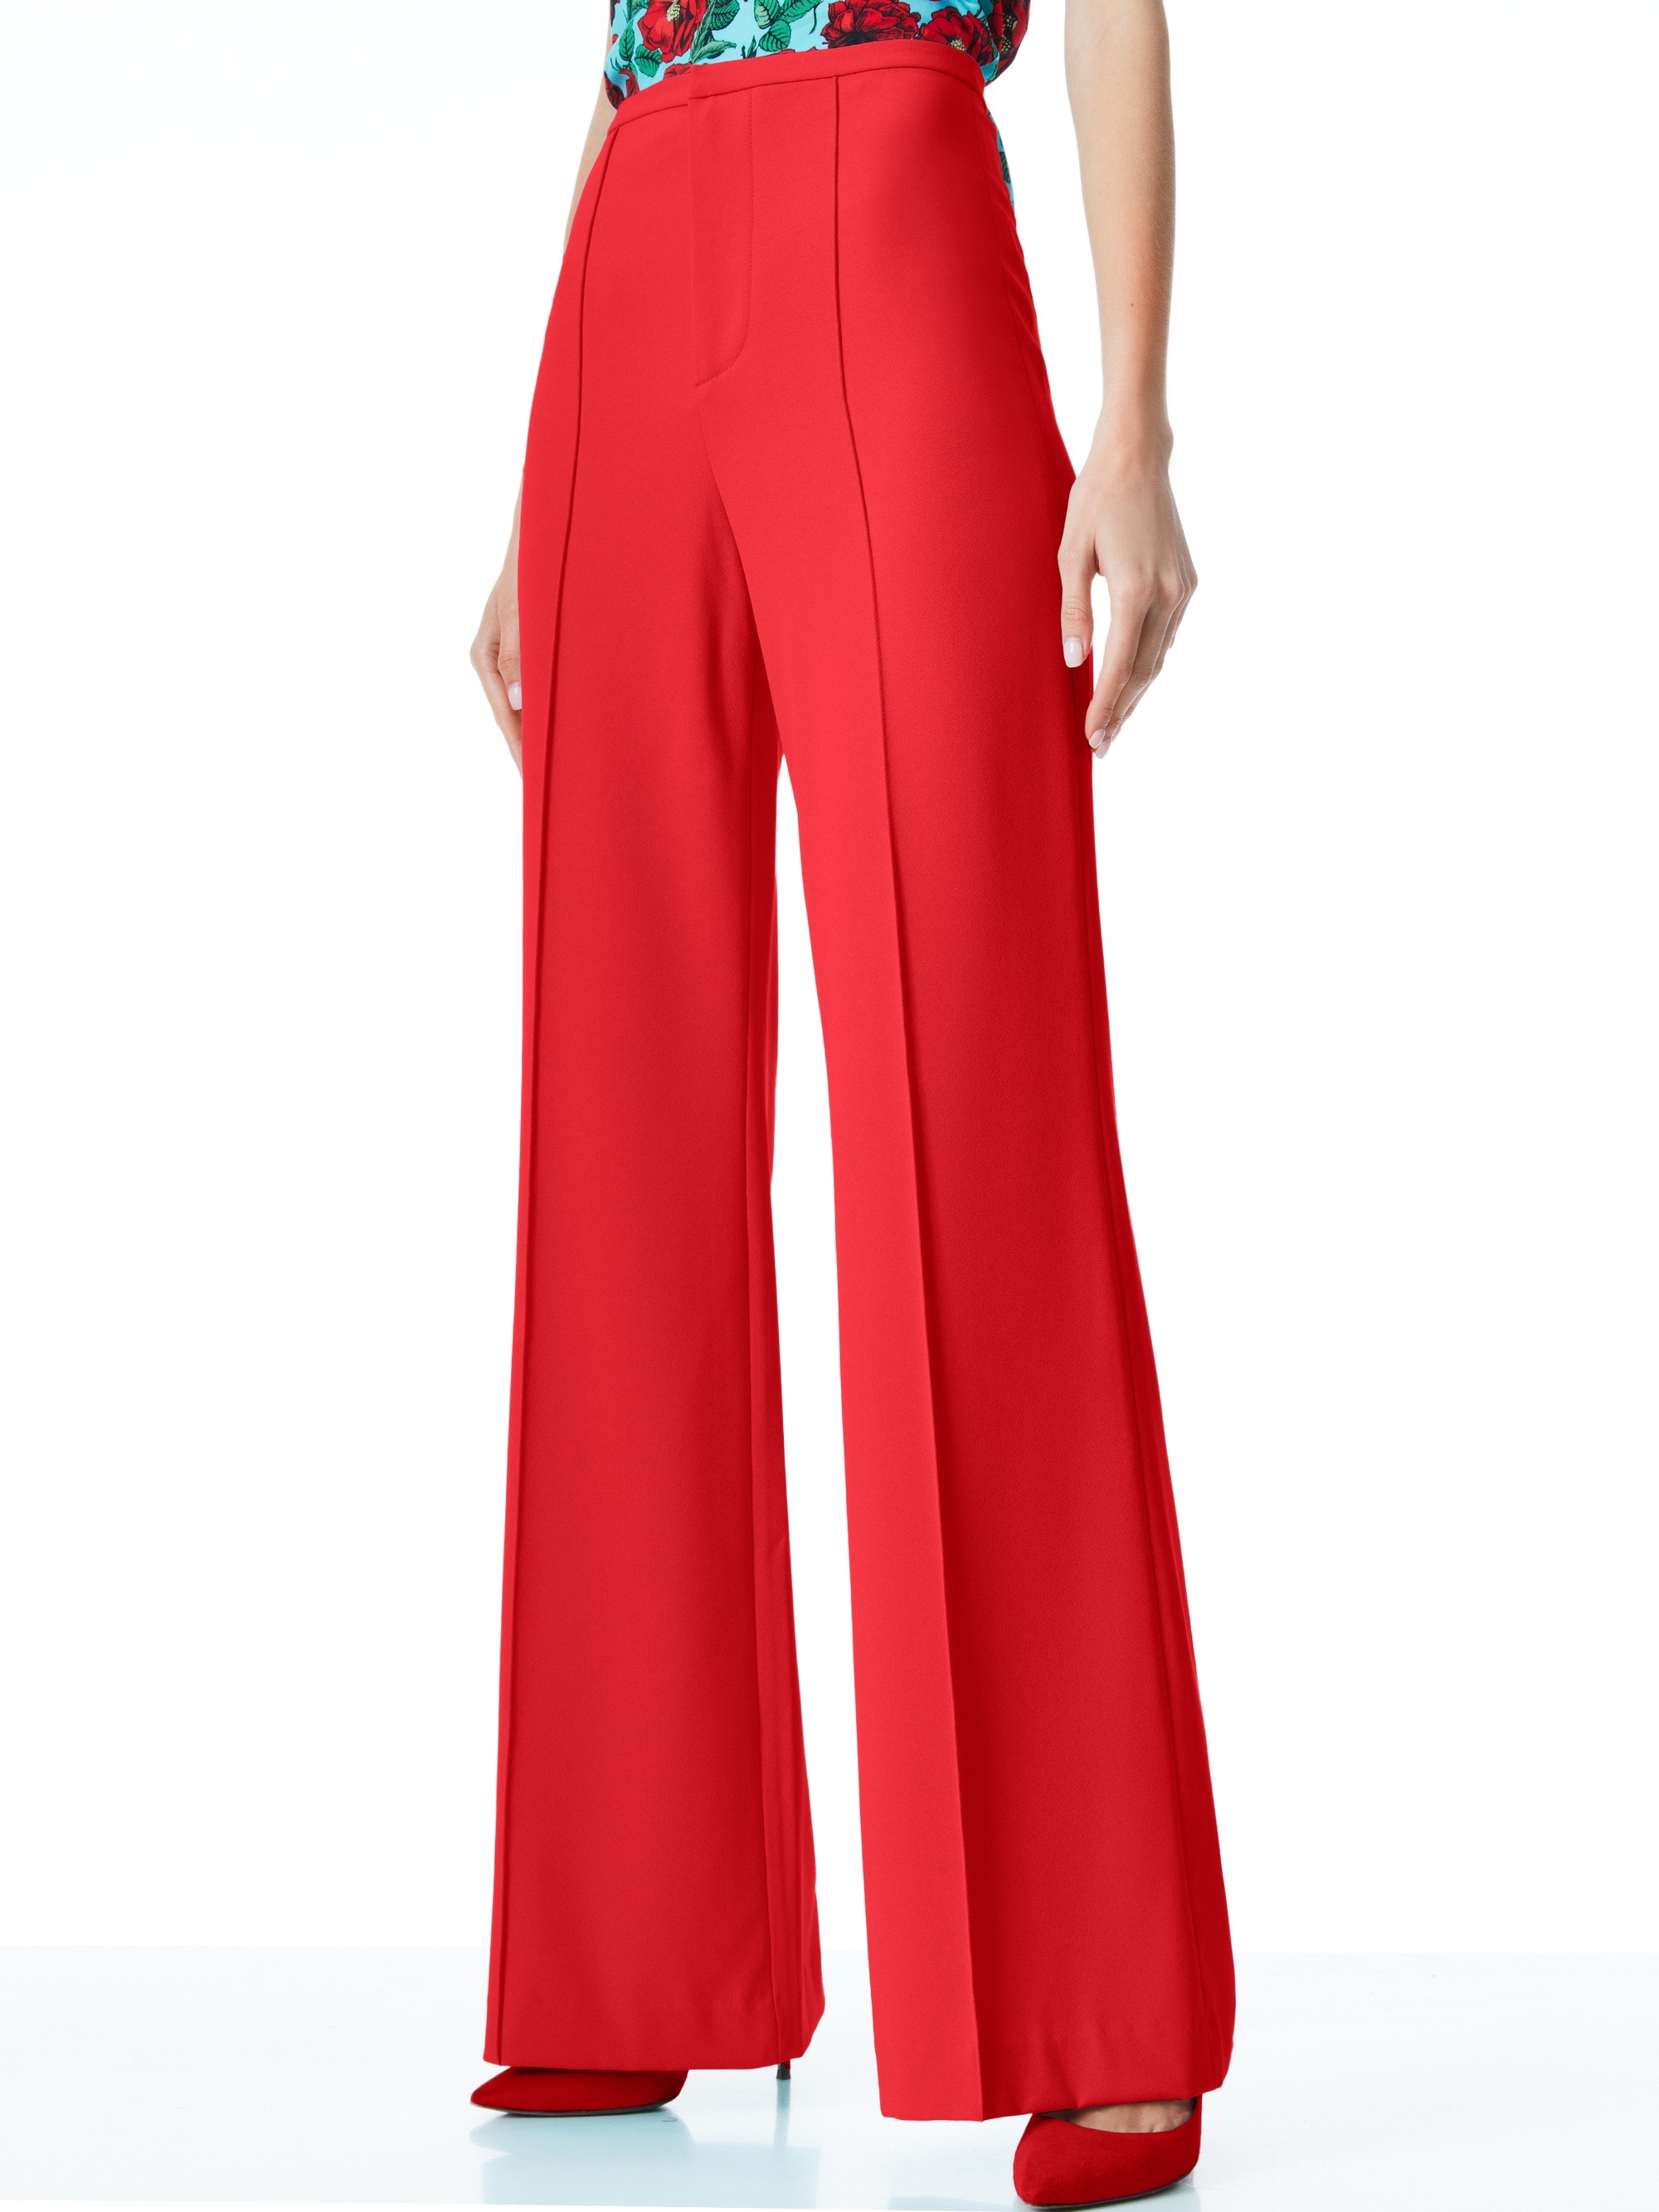 DYLAN HIGH WAISTED WIDE LEG PANT - 2